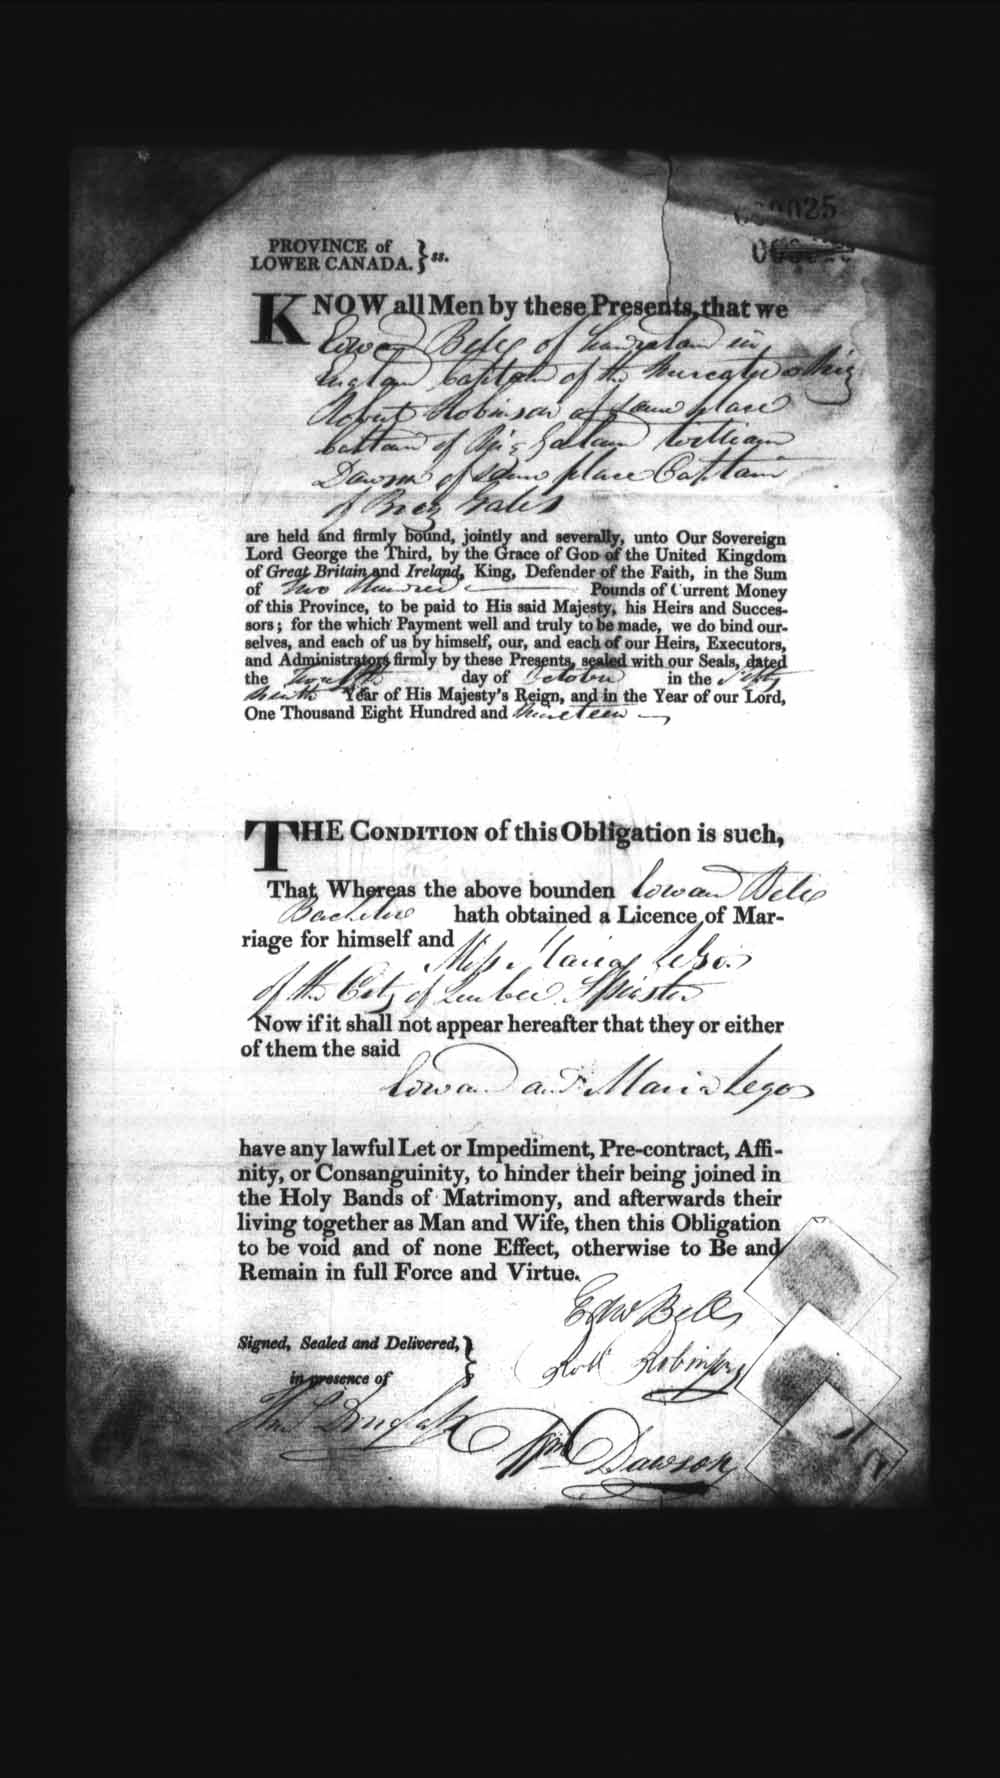 Digitized page of Upper and Lower Canada Marriage Bonds (1779-1865) for Image No.: e008235836